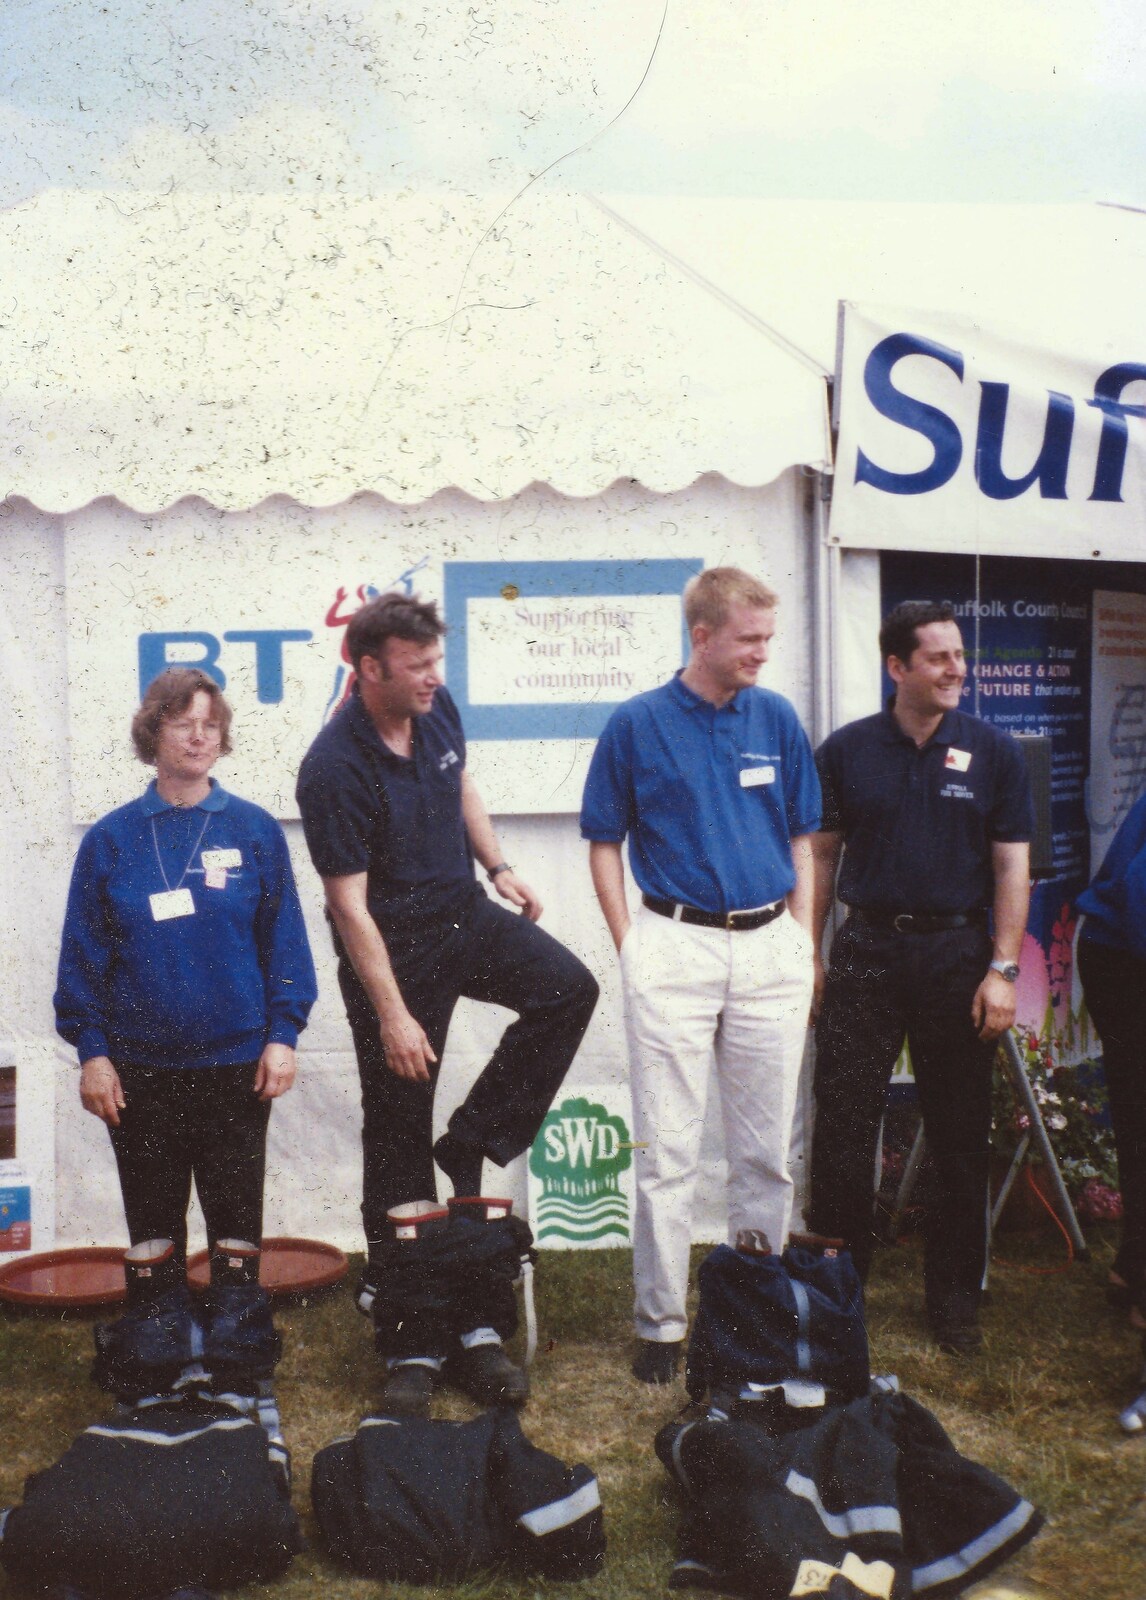 Nosher with the fire service from CISU do 'Internet-in-a-field', Suffolk Show, Ipswich - May 21st 1997